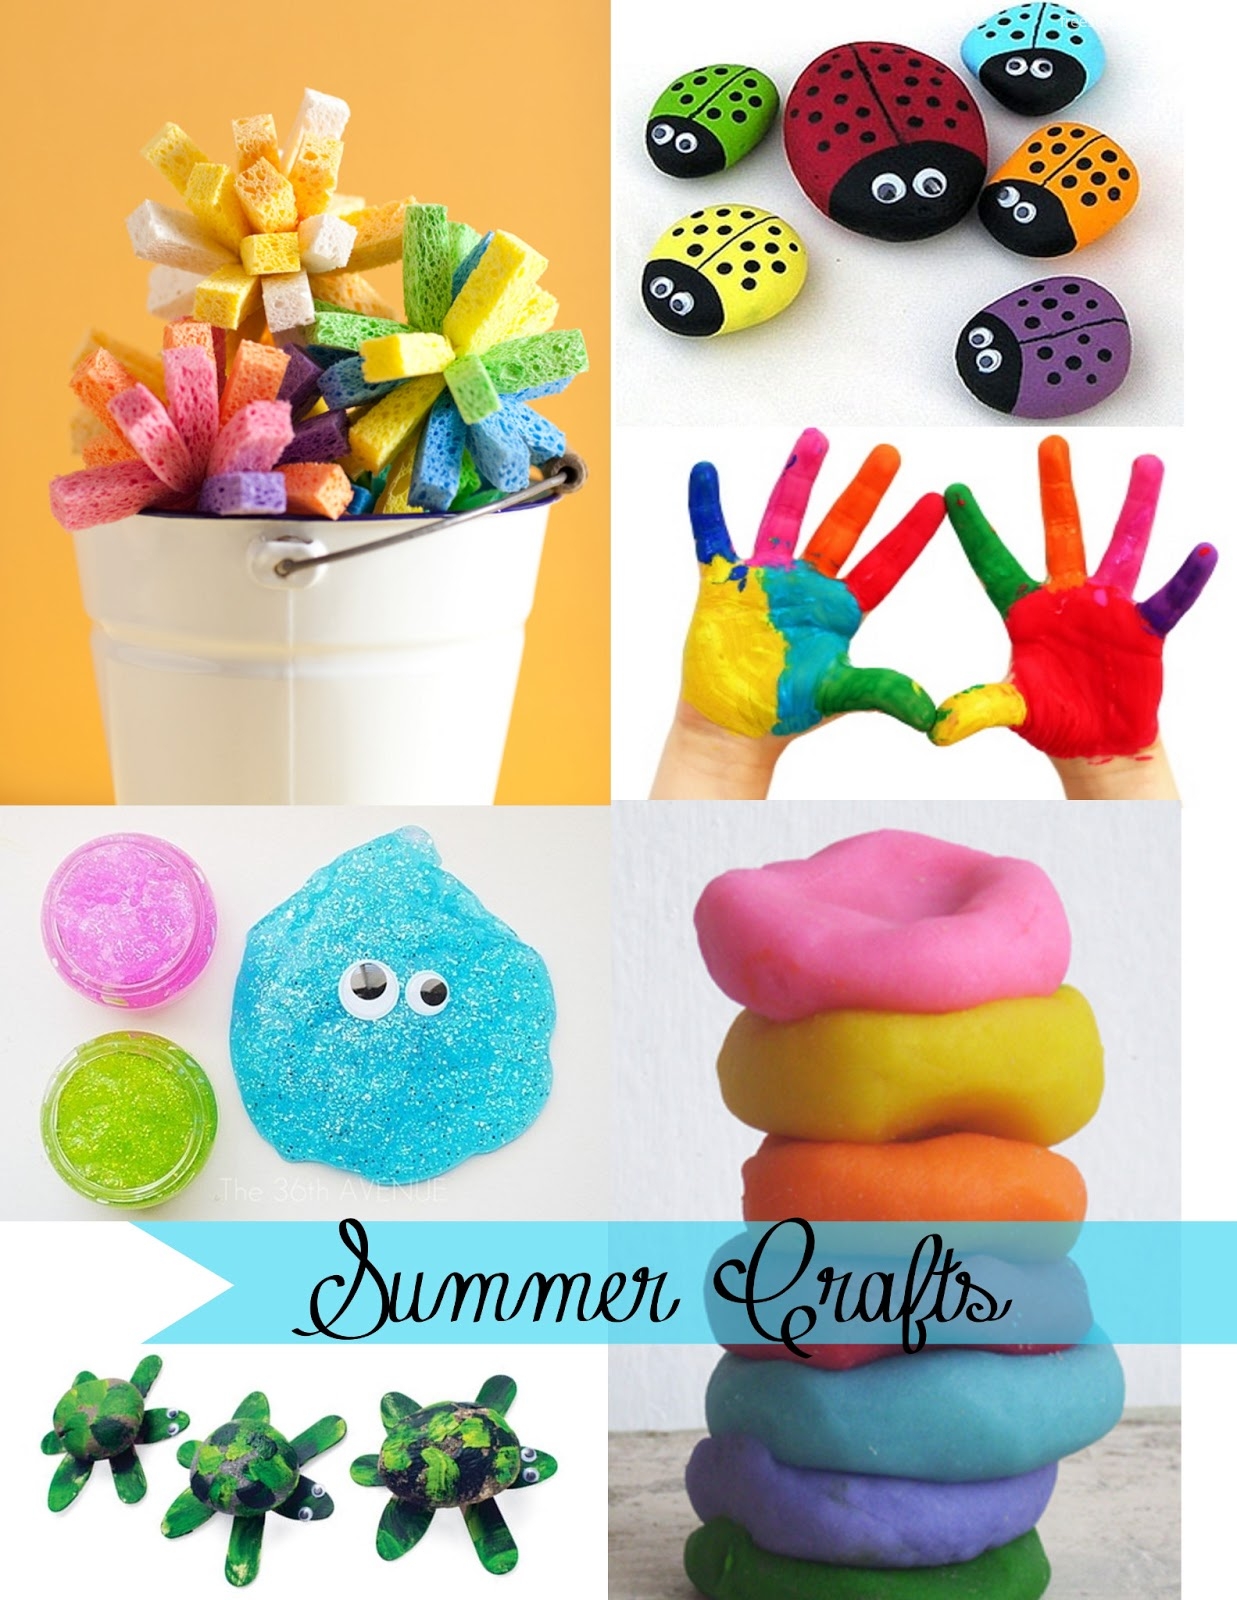 Stock Photos Of Logo To Creative Craft Ideas For Kids Image